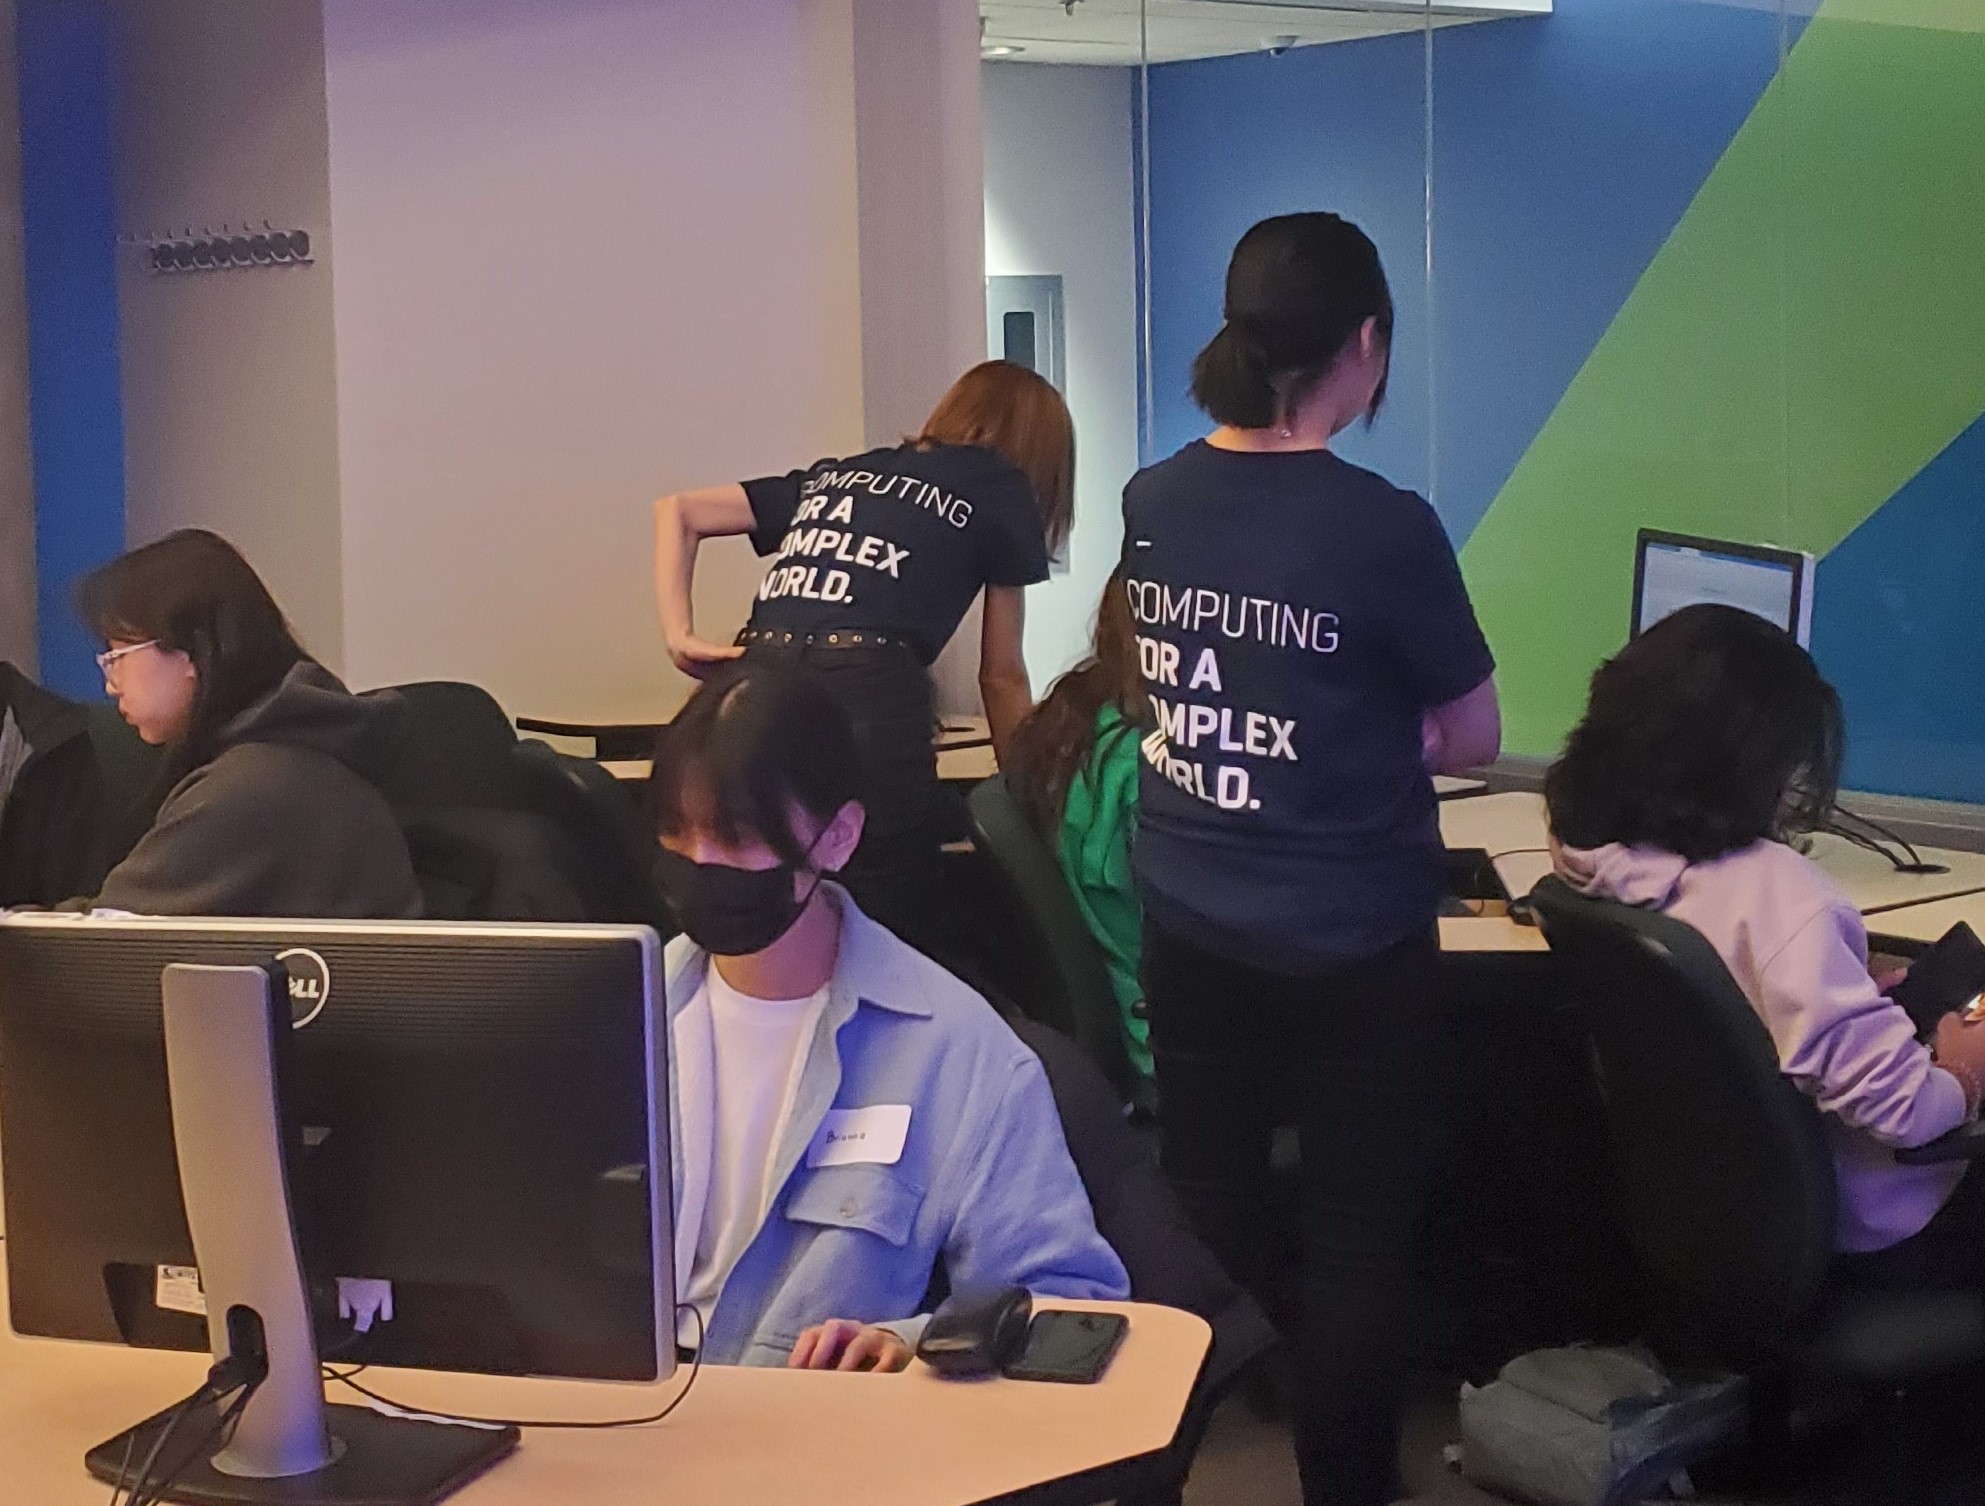 Two young women wearing "Computing for a Complex World" t-shirts help other young women working in a computer lab